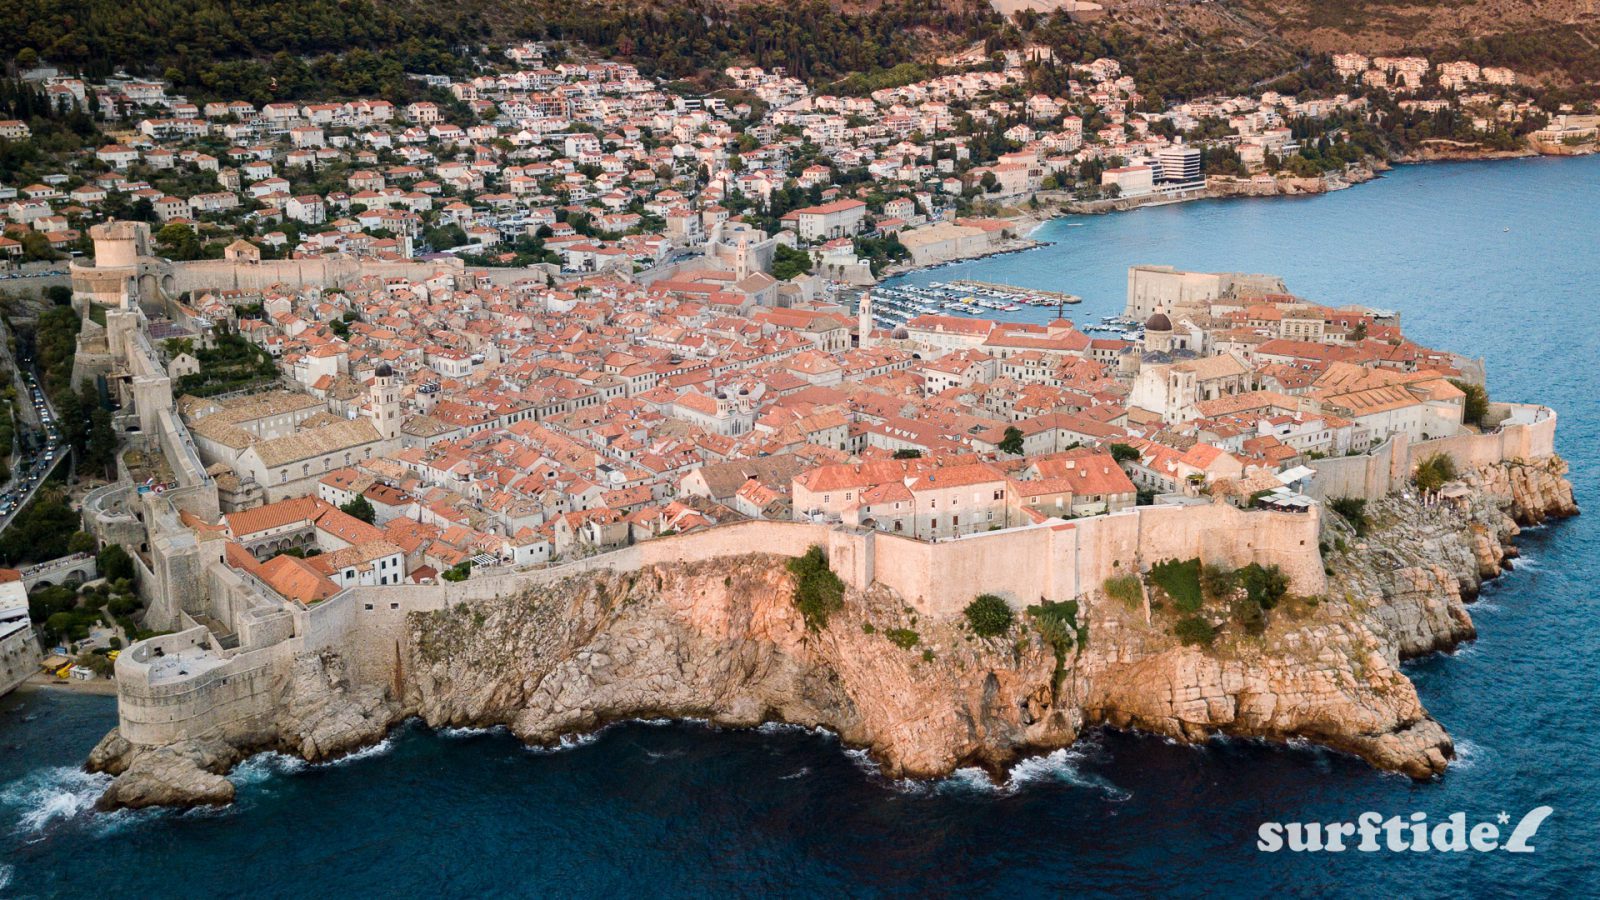 Aerial view of the city of Dubrovnik showing the historic city walls and the sea and harbour